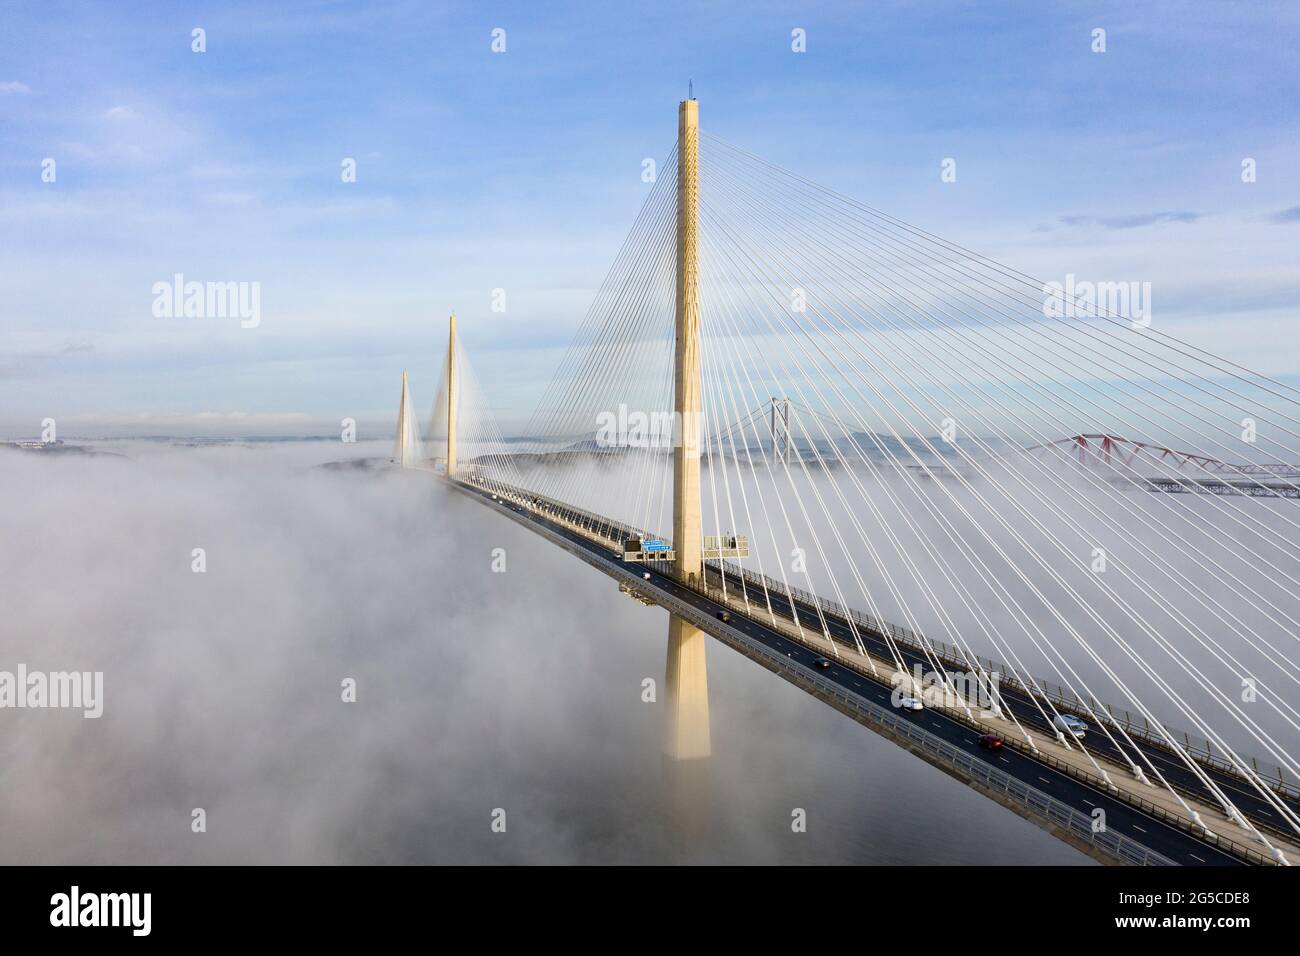 Drone image of a spectacular cloud inversion at Queensferry Crossing Bridge with lower half covered in mist, South Queensferry , Scotland, UK Stock Photo